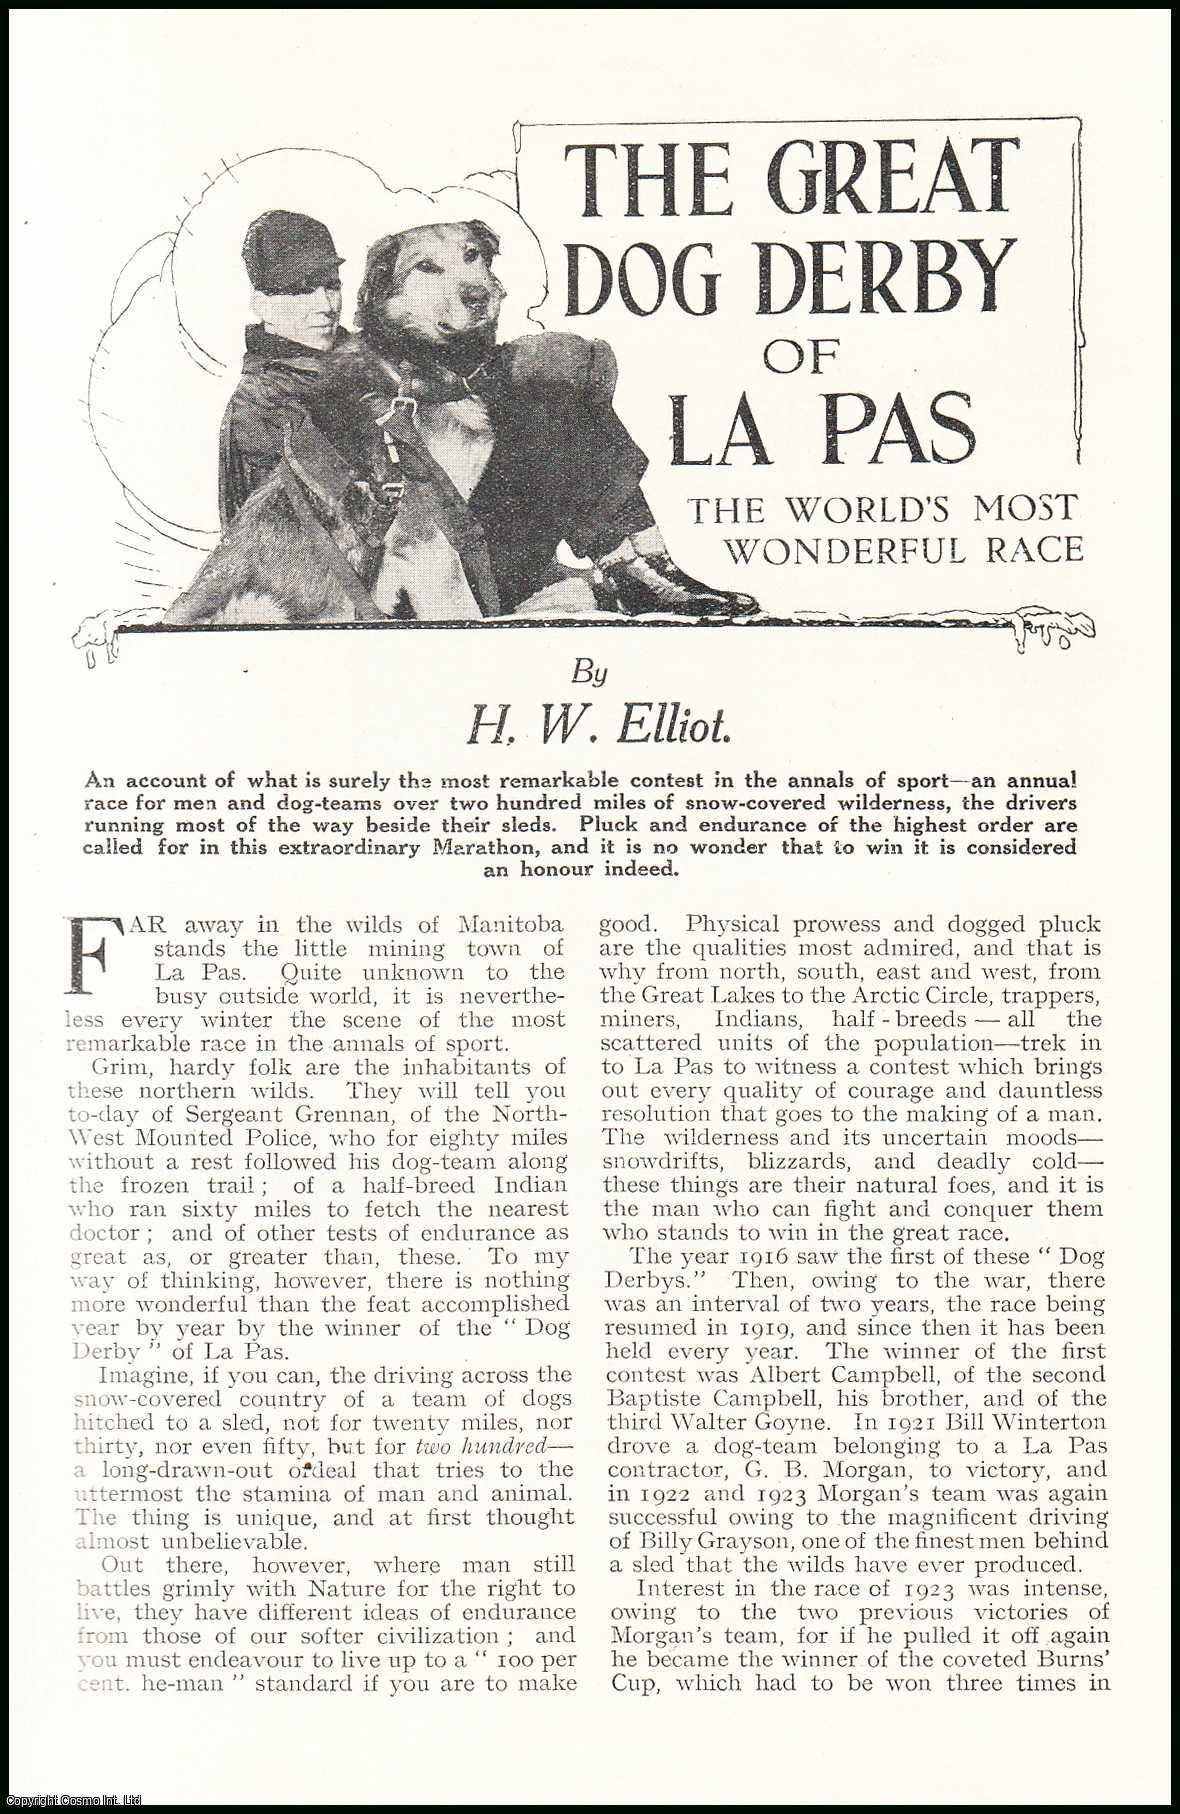 H.W. Elliot - The Great Dog Derby of La Pas : dog sled race. An uncommon original article from the Wide World Magazine, 1924.